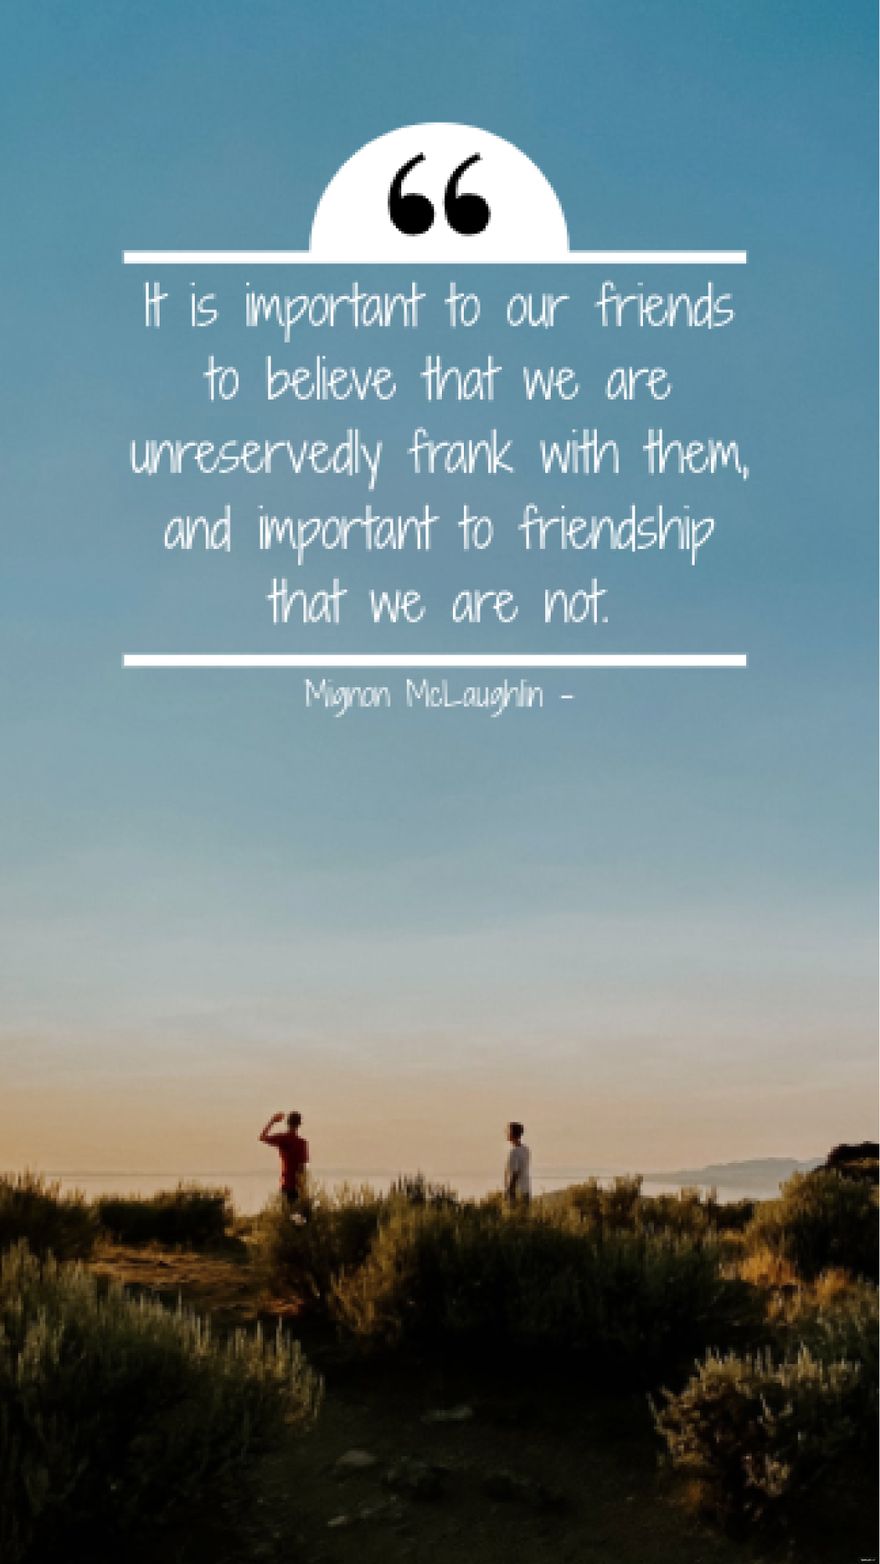 Mignon McLaughlin - It is important to our friends to believe that we are unreservedly frank with them, and important to friendship that we are not.